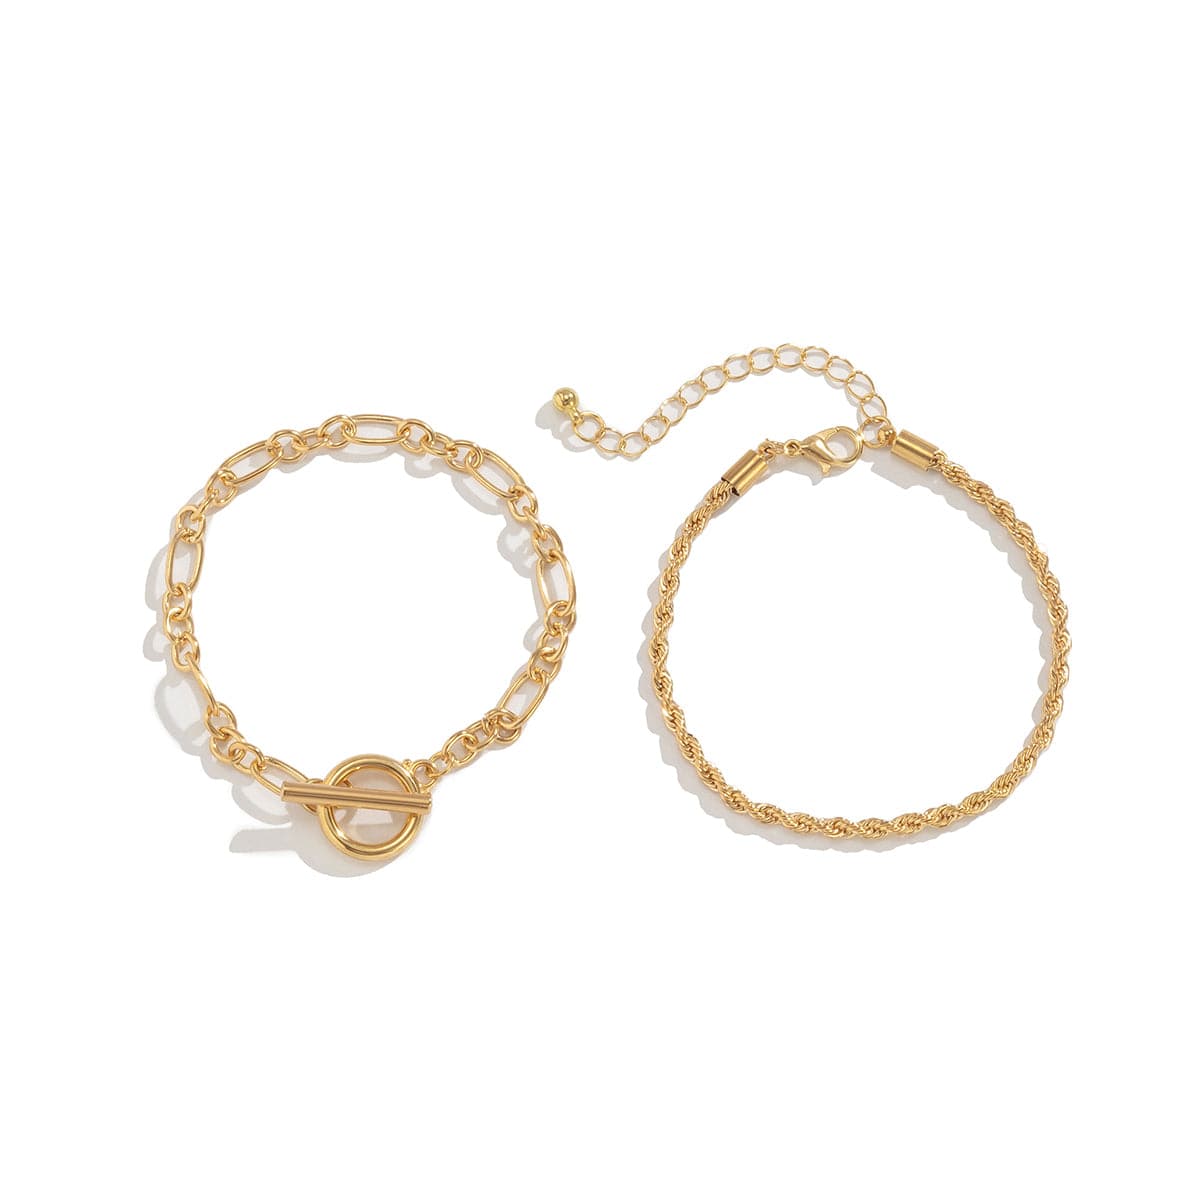 18K Gold-Plated Toggle Rope Chain Bracelet Set